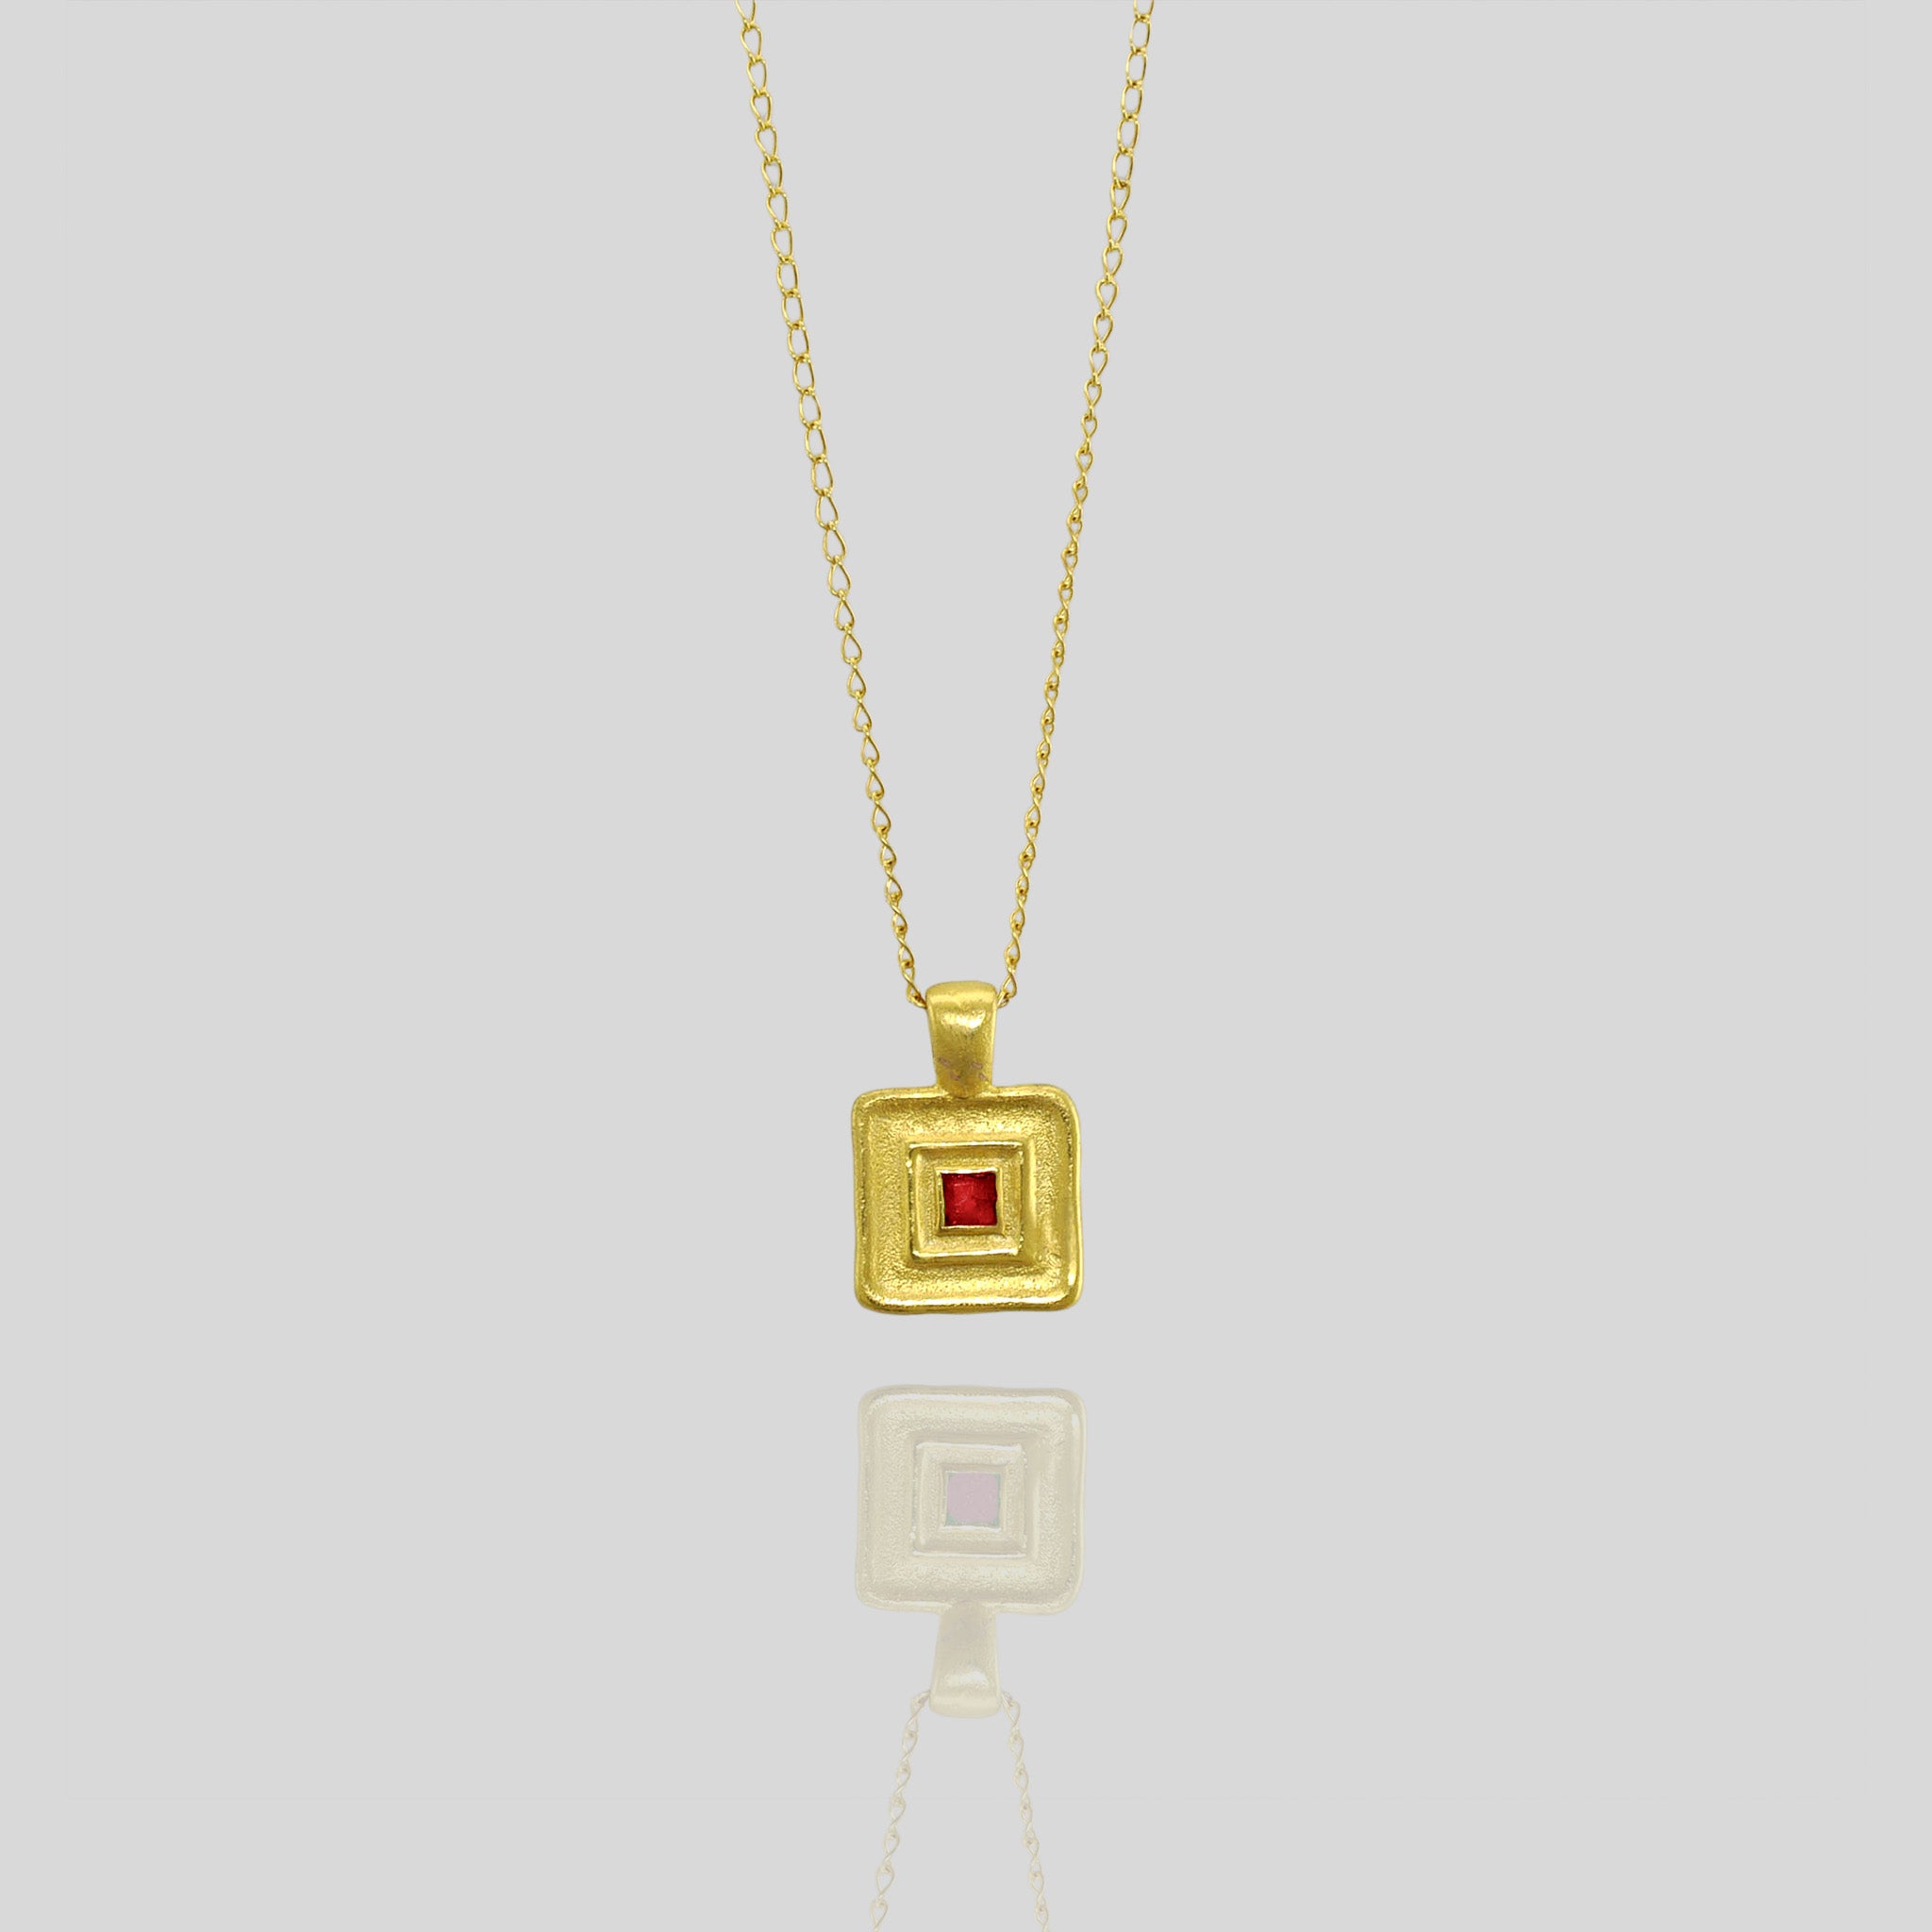 Handmade square gold pendant featuring a square Ruby gemstone at its heart, crafted from Yellow Gold to mirror the majestic jewelry of ancient Egyptian Pharaohs.